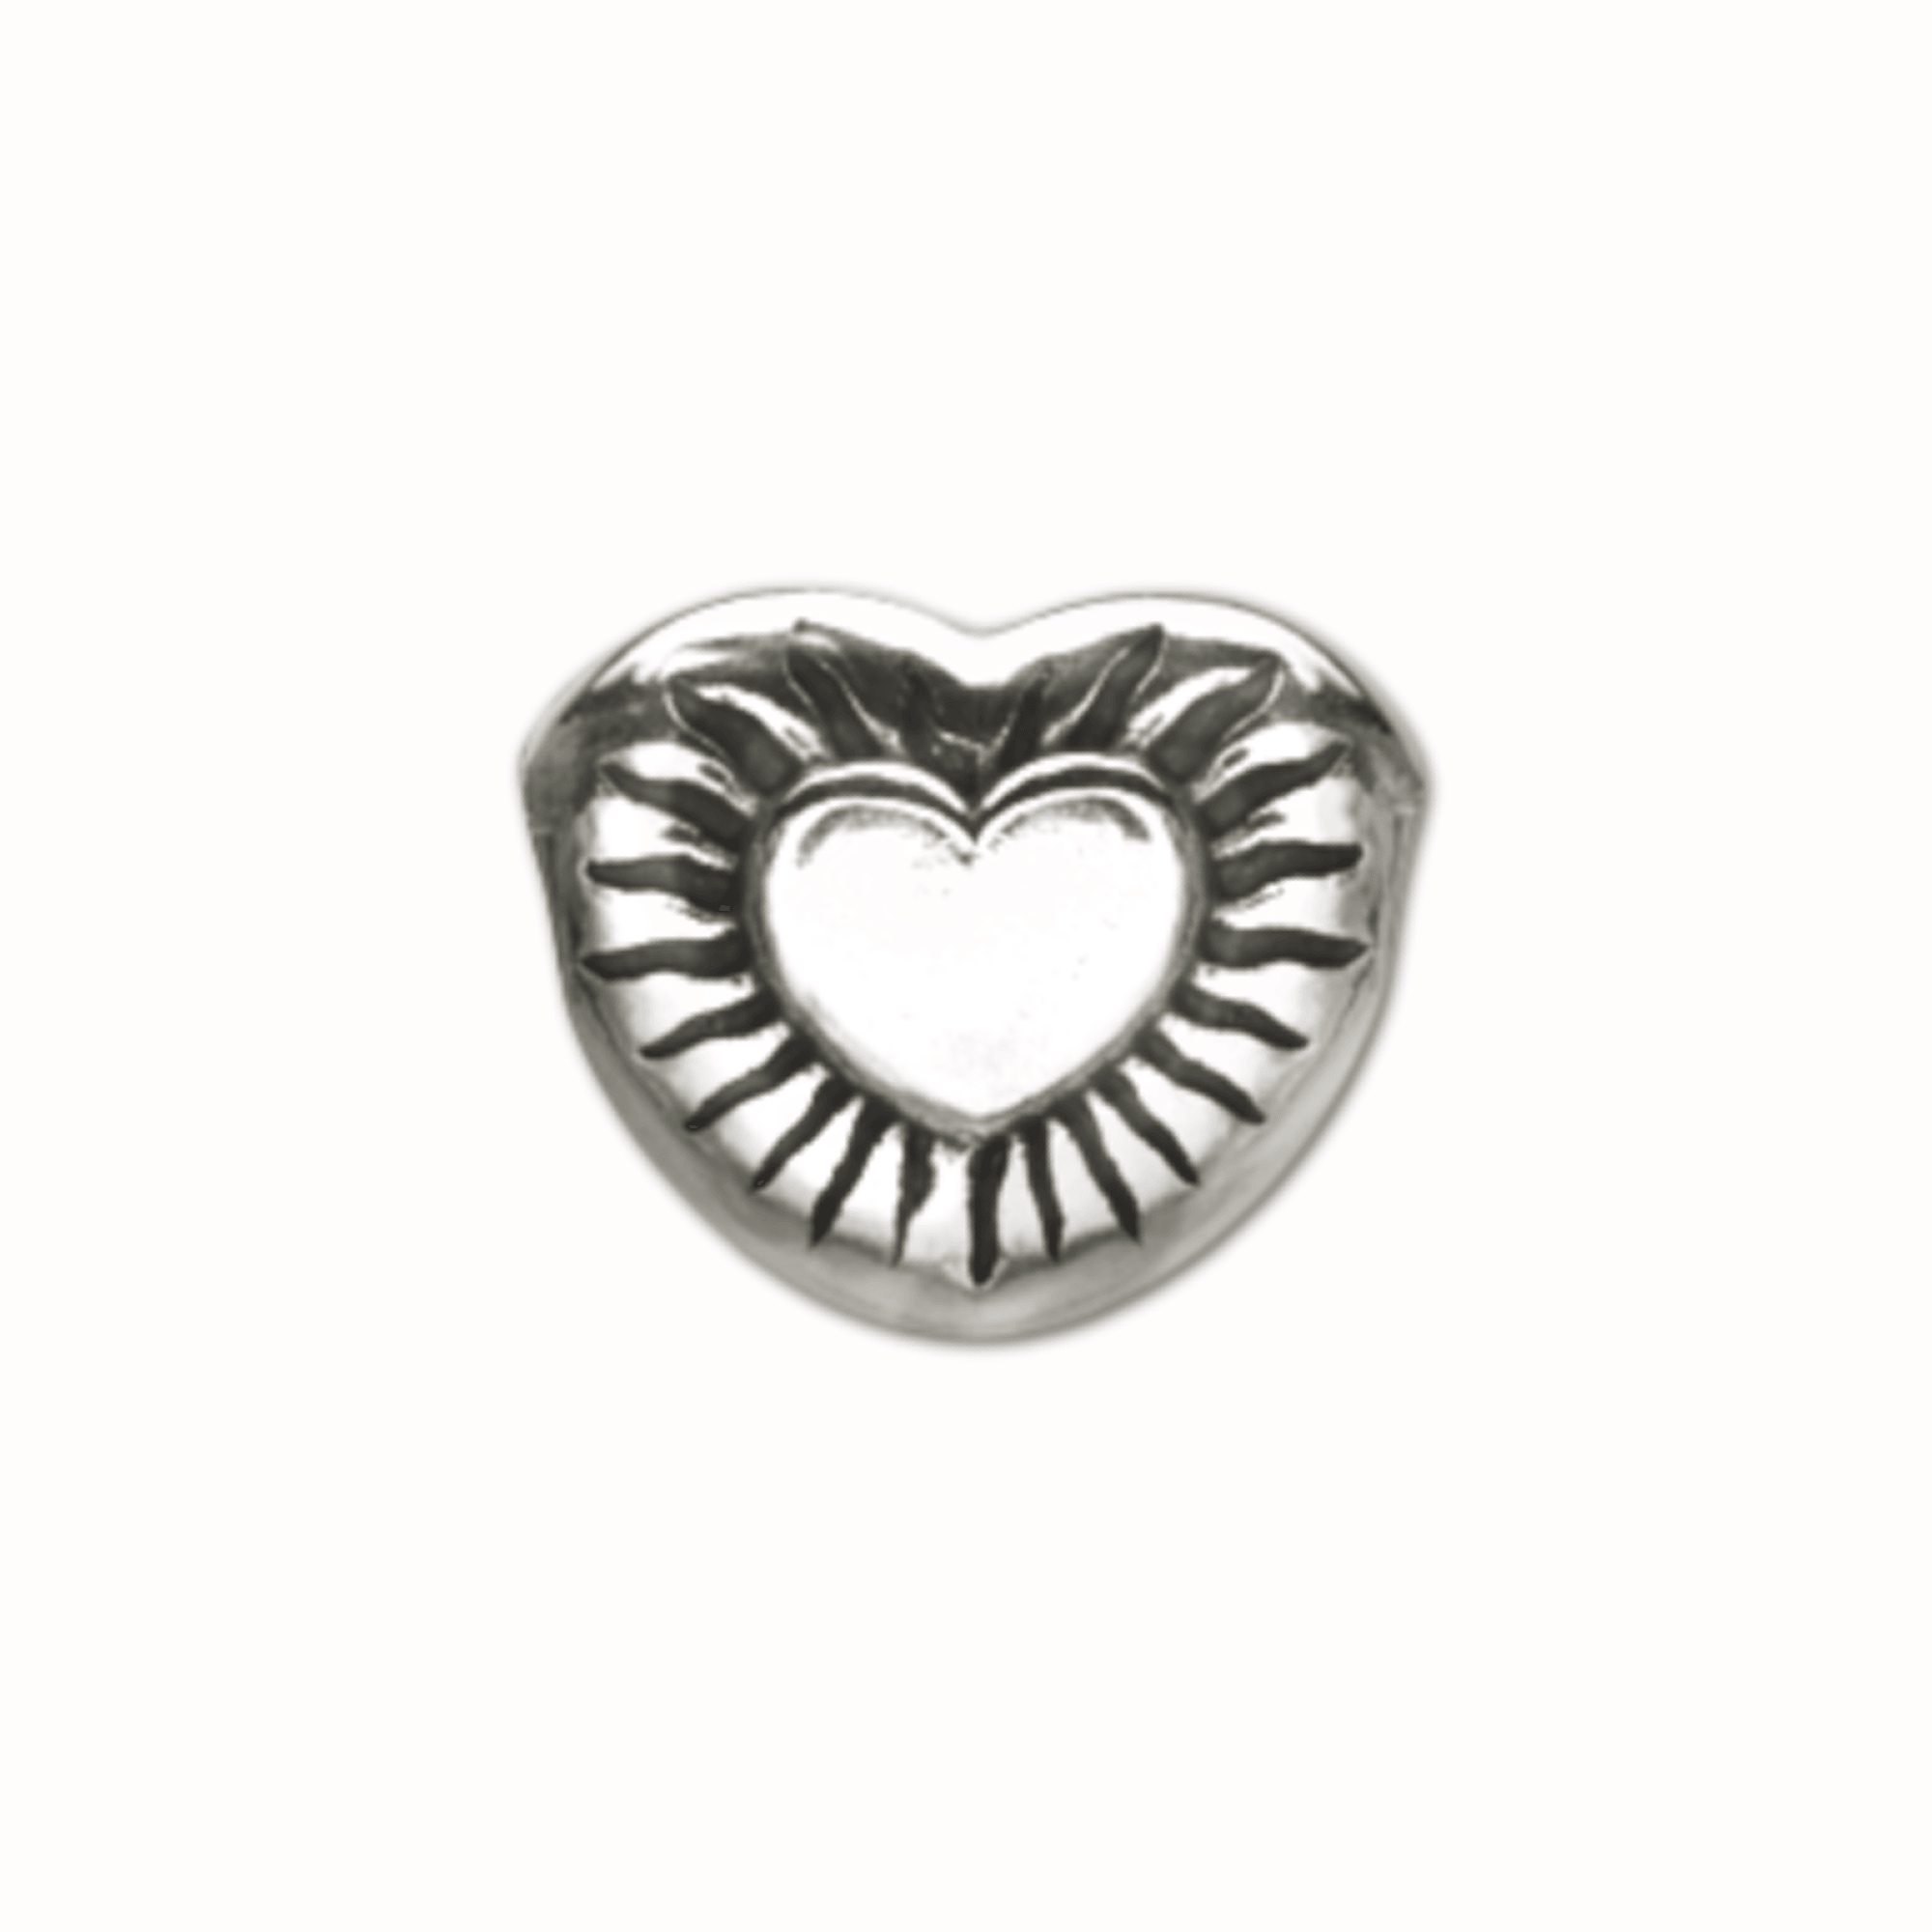 Military Jewelry, Military Charms, Military Gifts, Spacers, Valentine's Charm, Friendship Charm